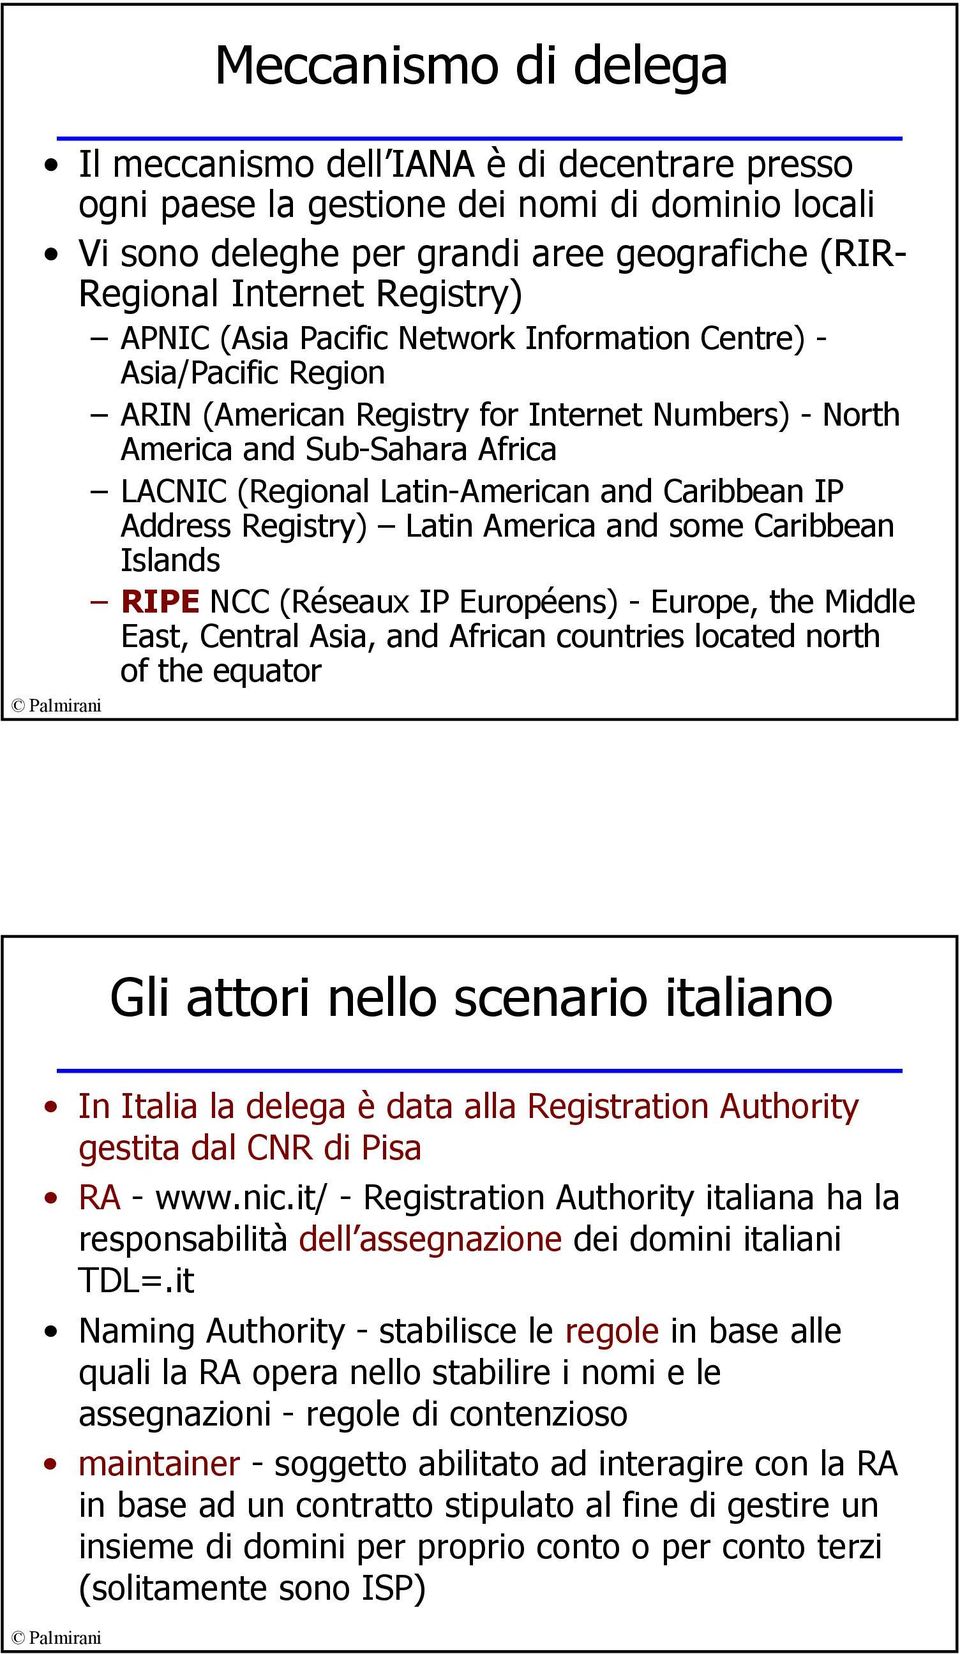 IP Address Registry) Latin America and some Caribbean Islands RIPE NCC (Réseaux IP Européens) -Europe, the Middle East, Central Asia, and African countries located north of the equator Gli attori